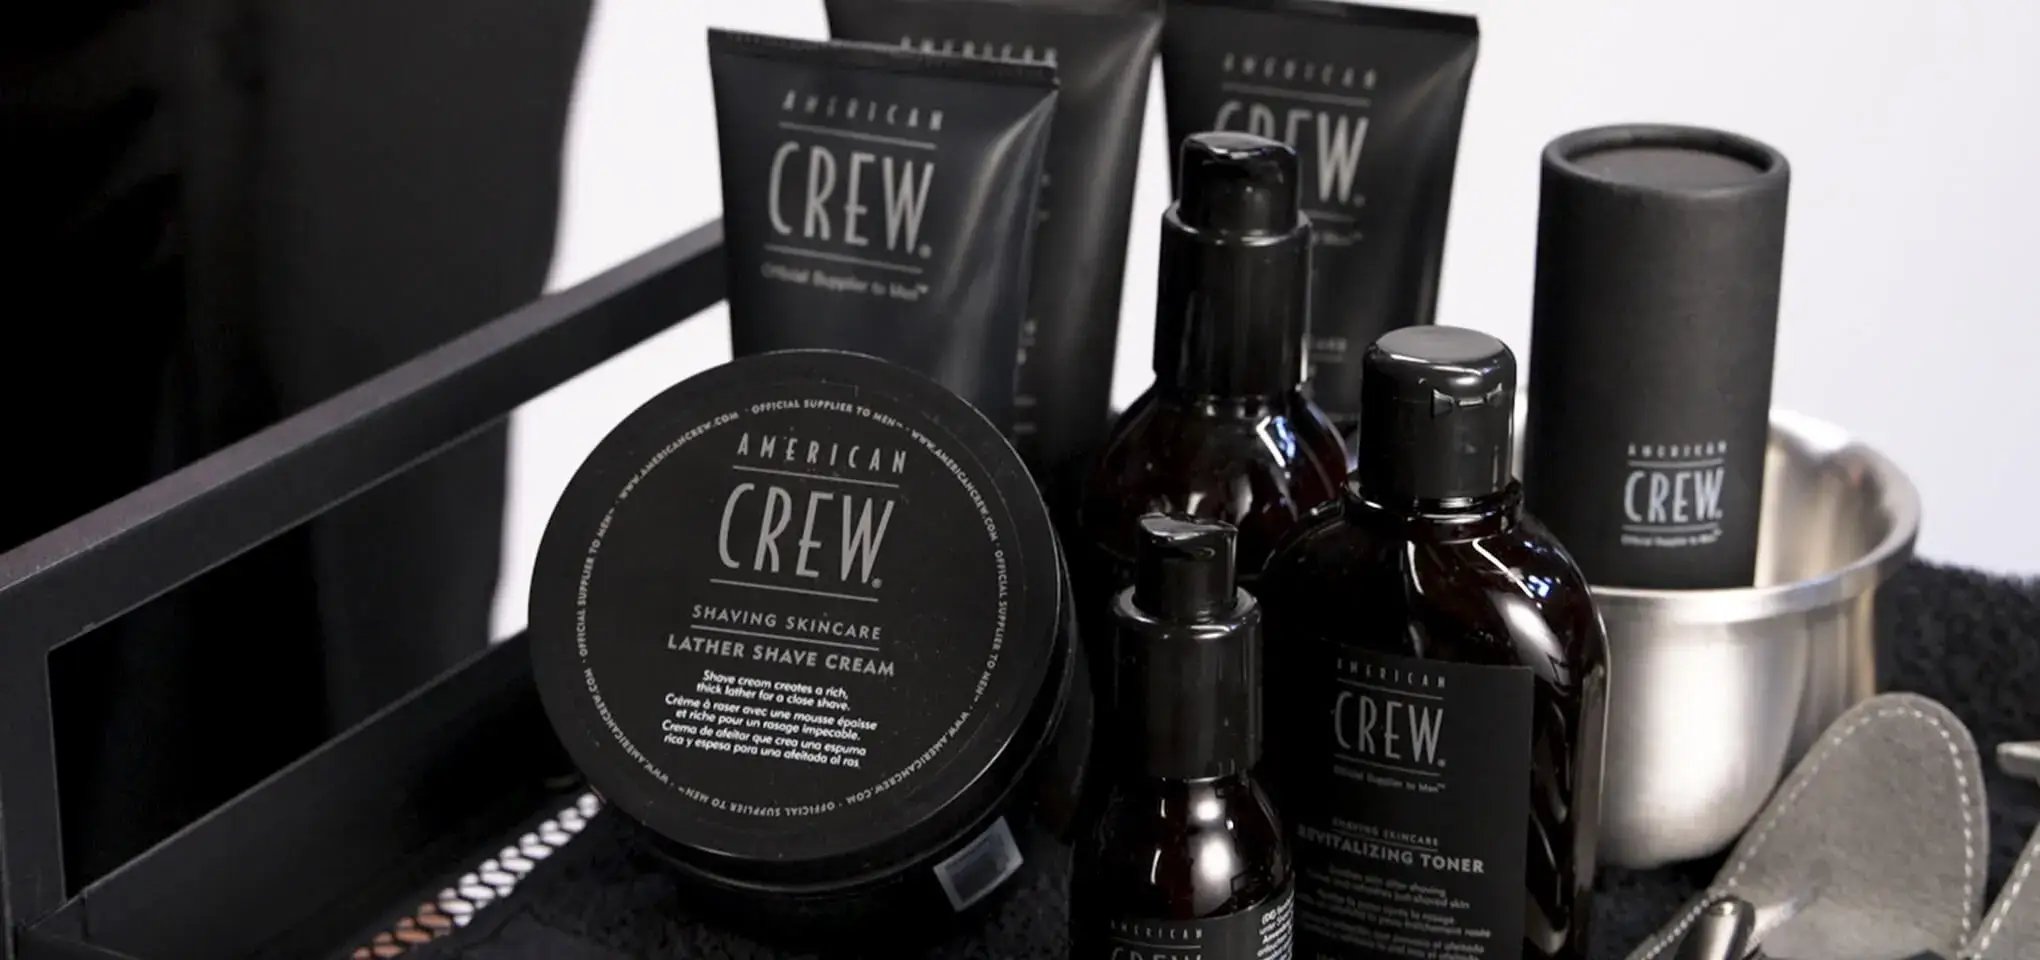 Beardcare & Shaving Products from American Crew